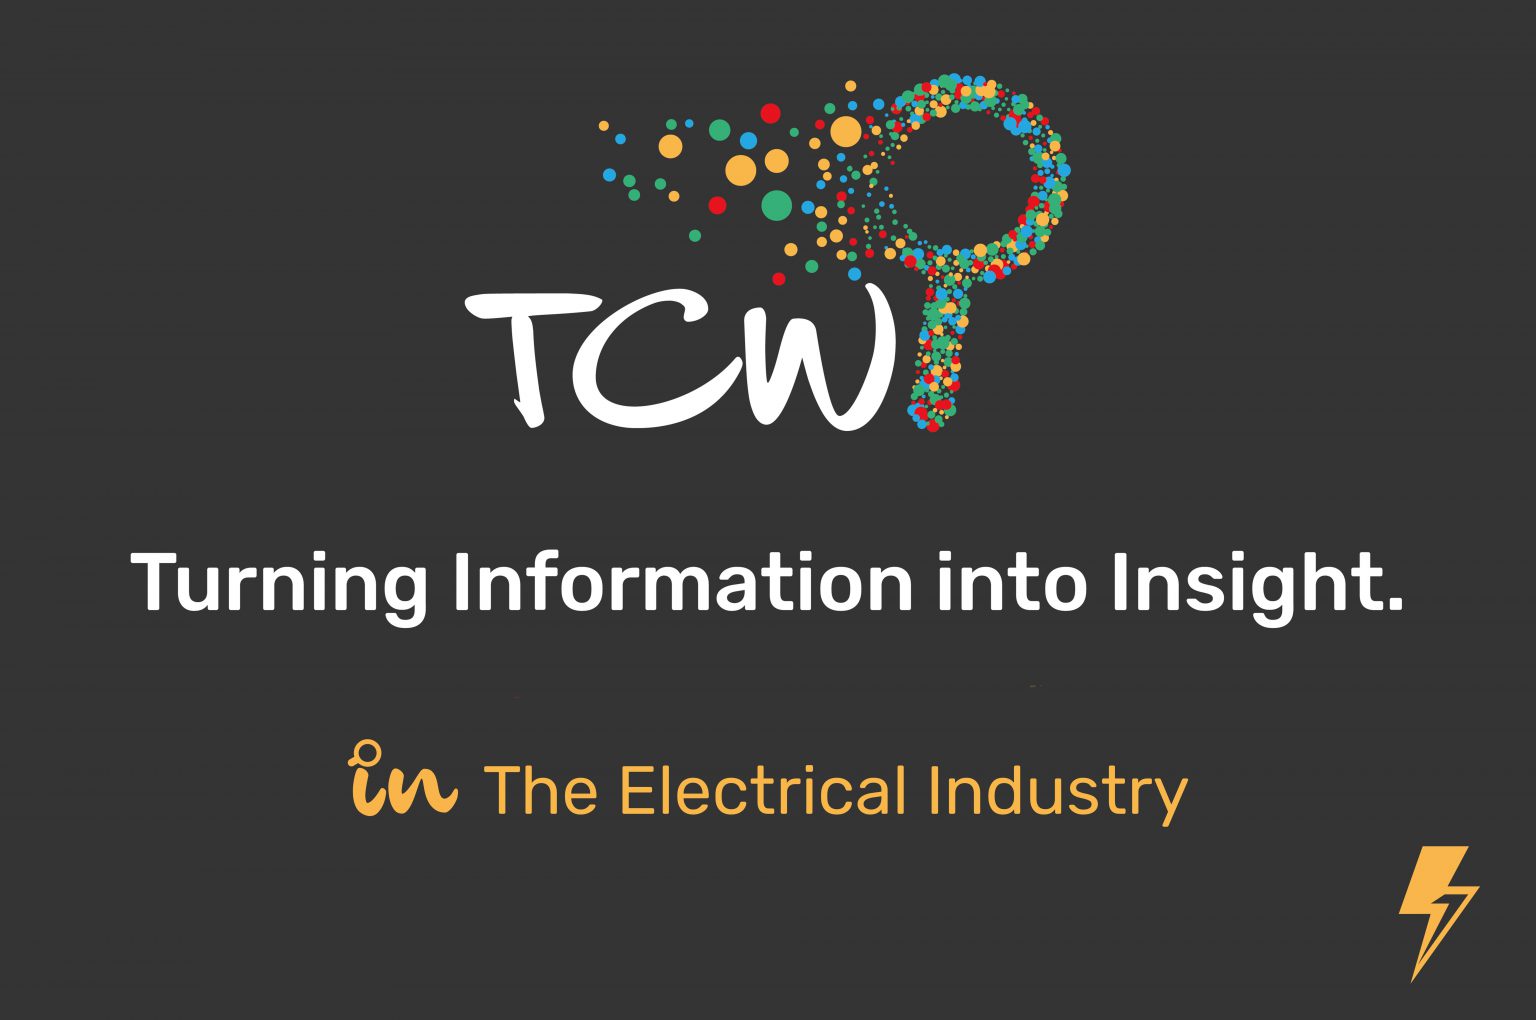 How can we improve the Electrical Industry?